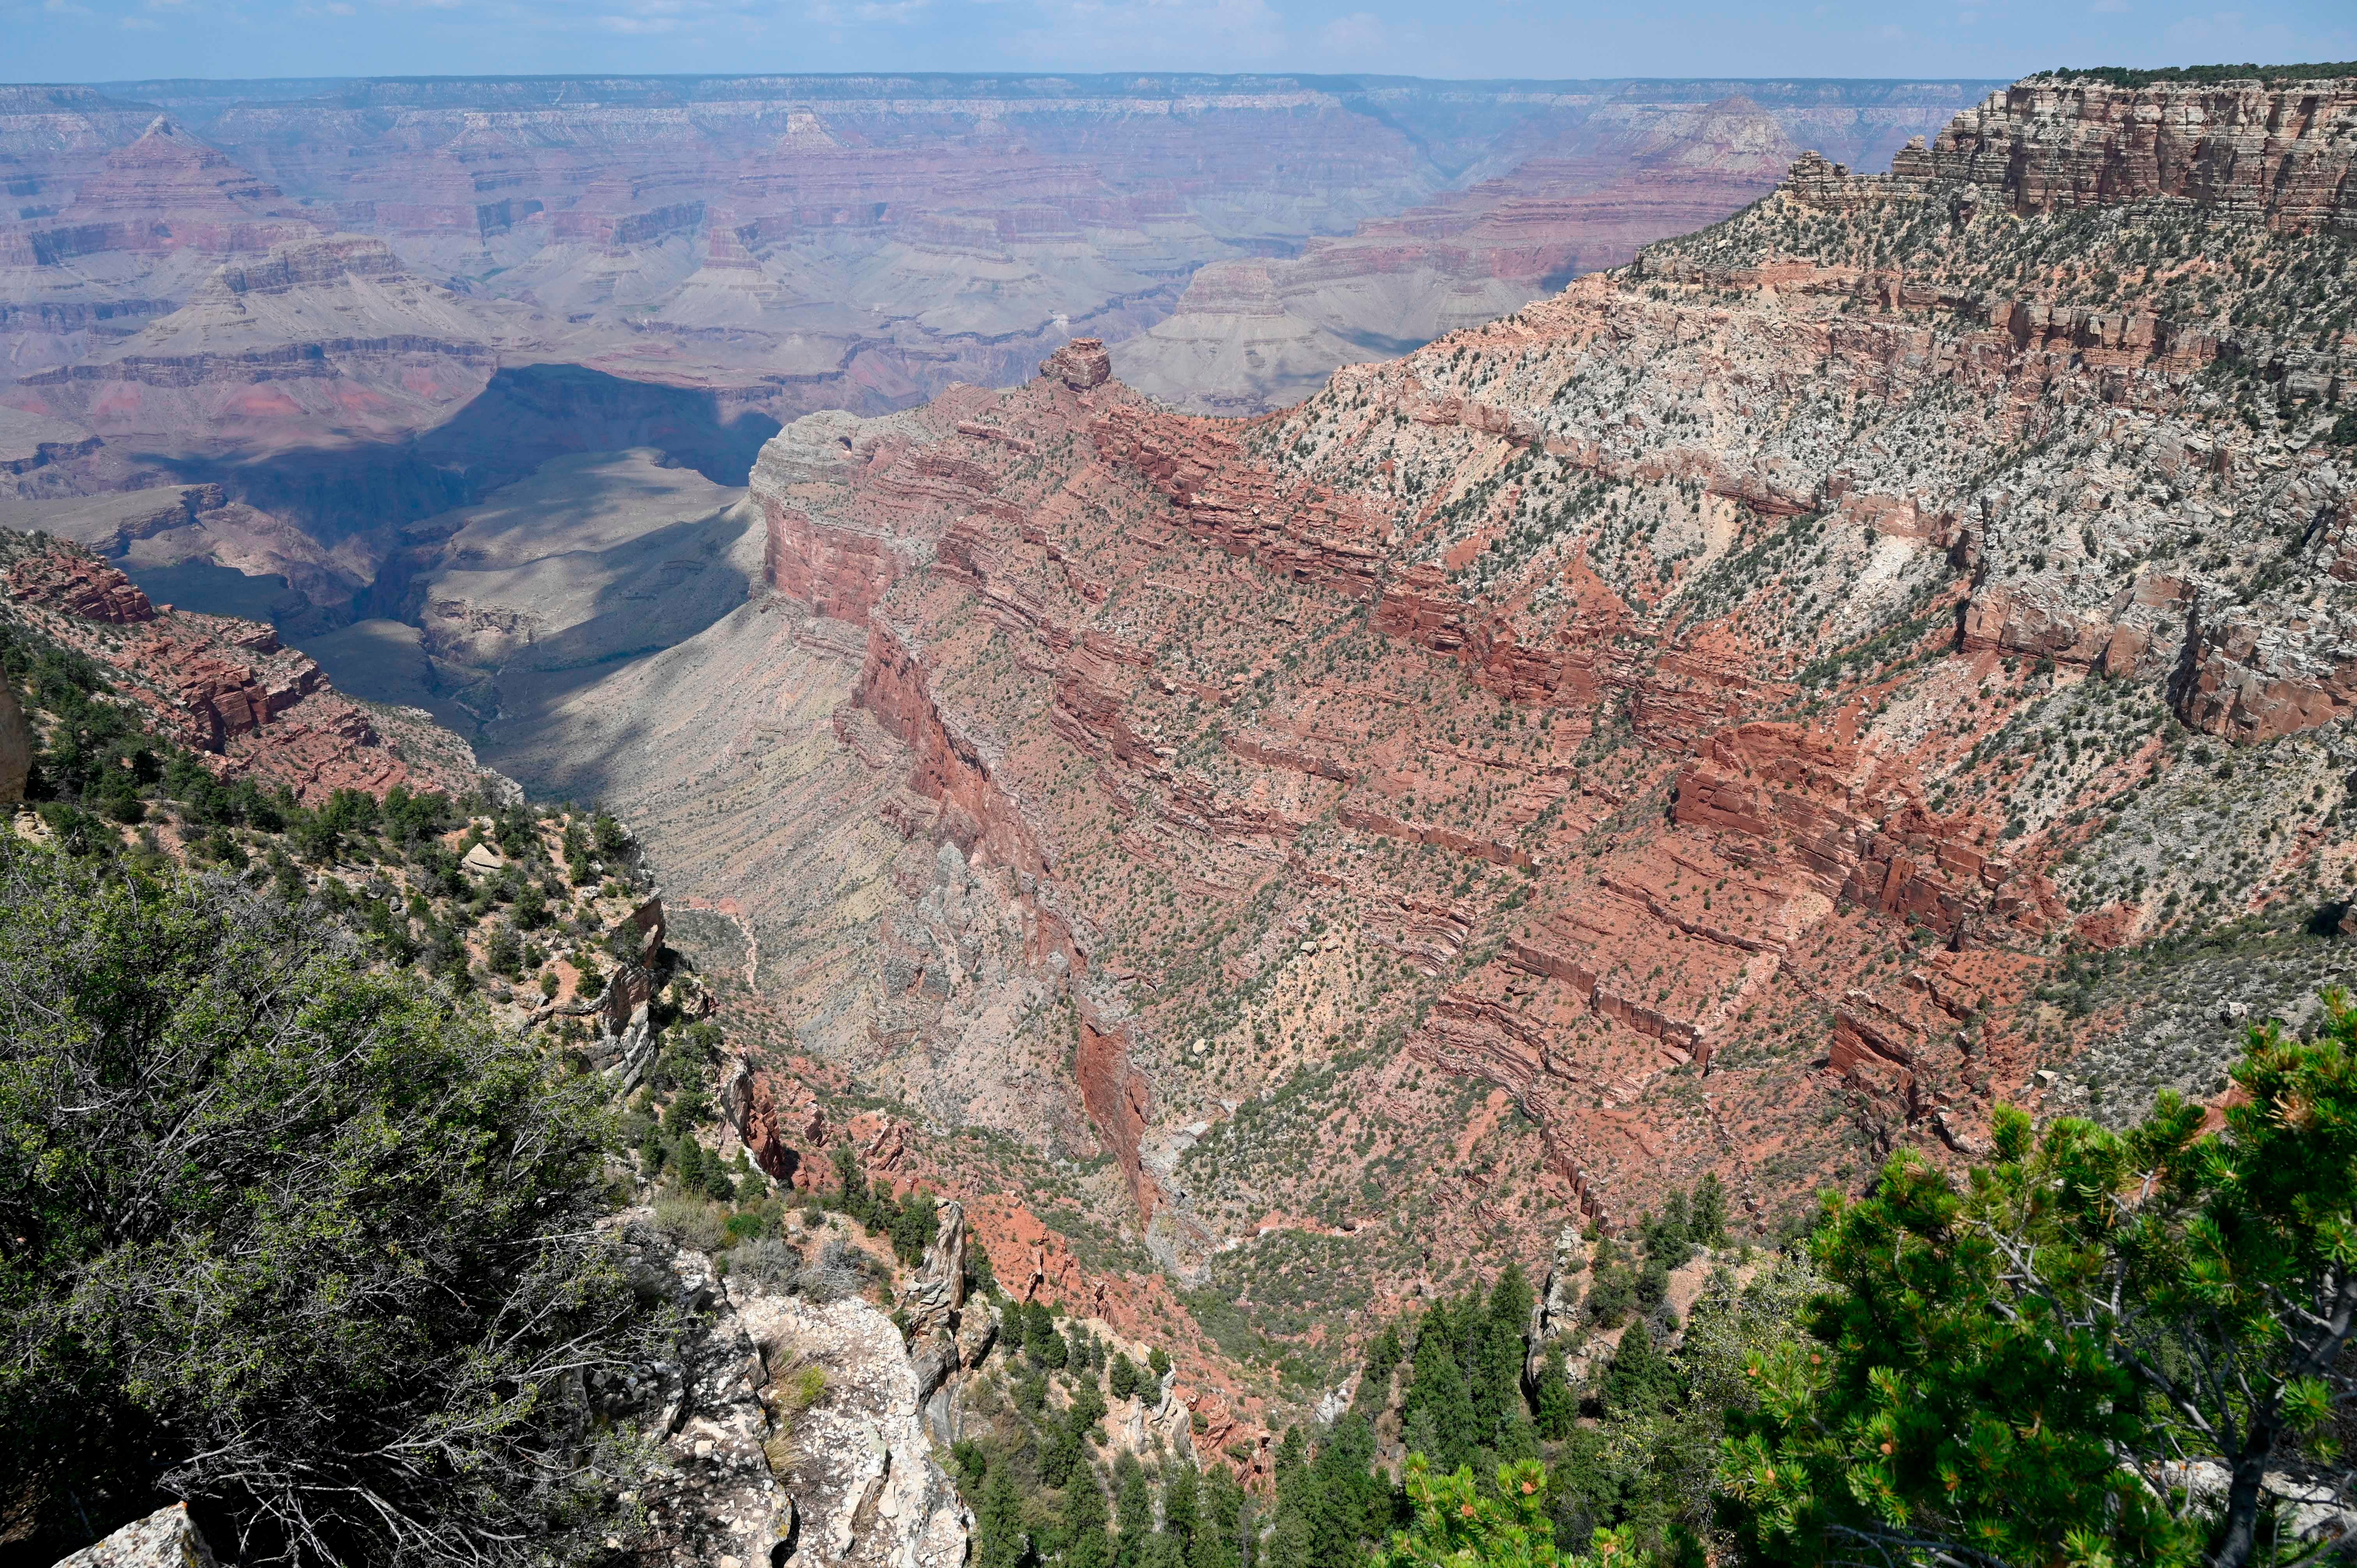 The total 1.2 million estimate also equates to roughly the same size space as Grand Canyon National Park.